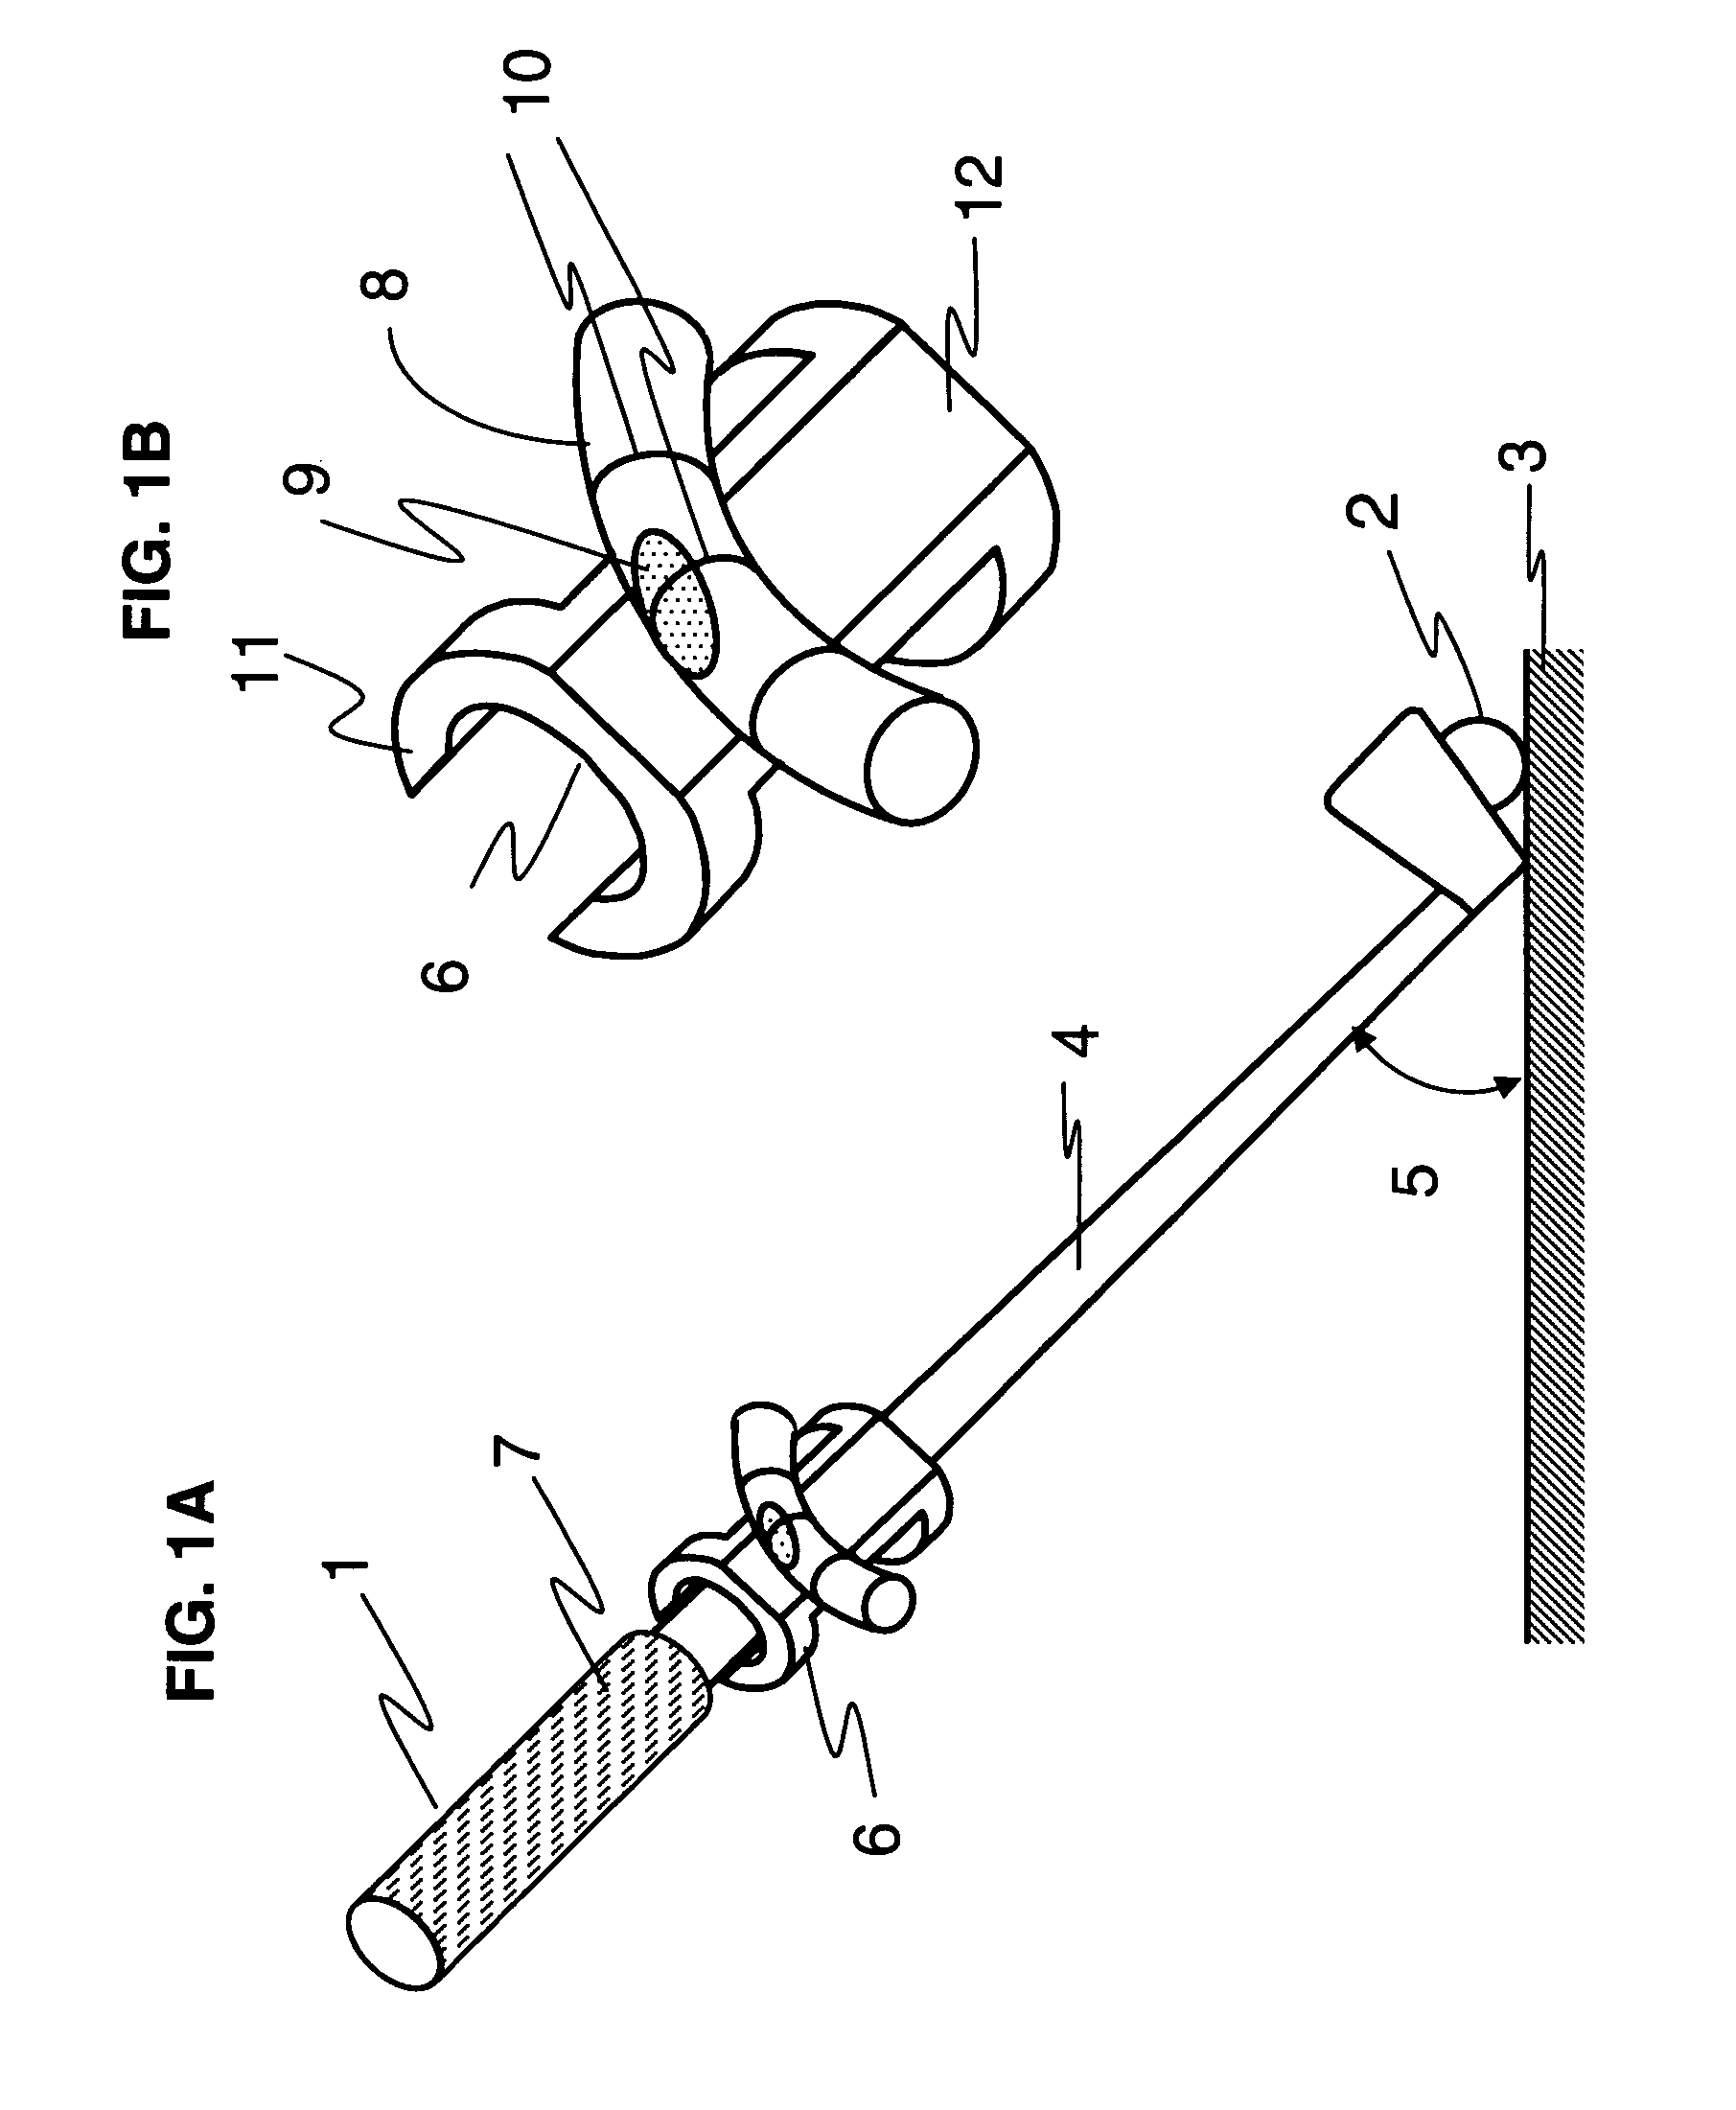 Method and apparatus for executing repeatable golf swings